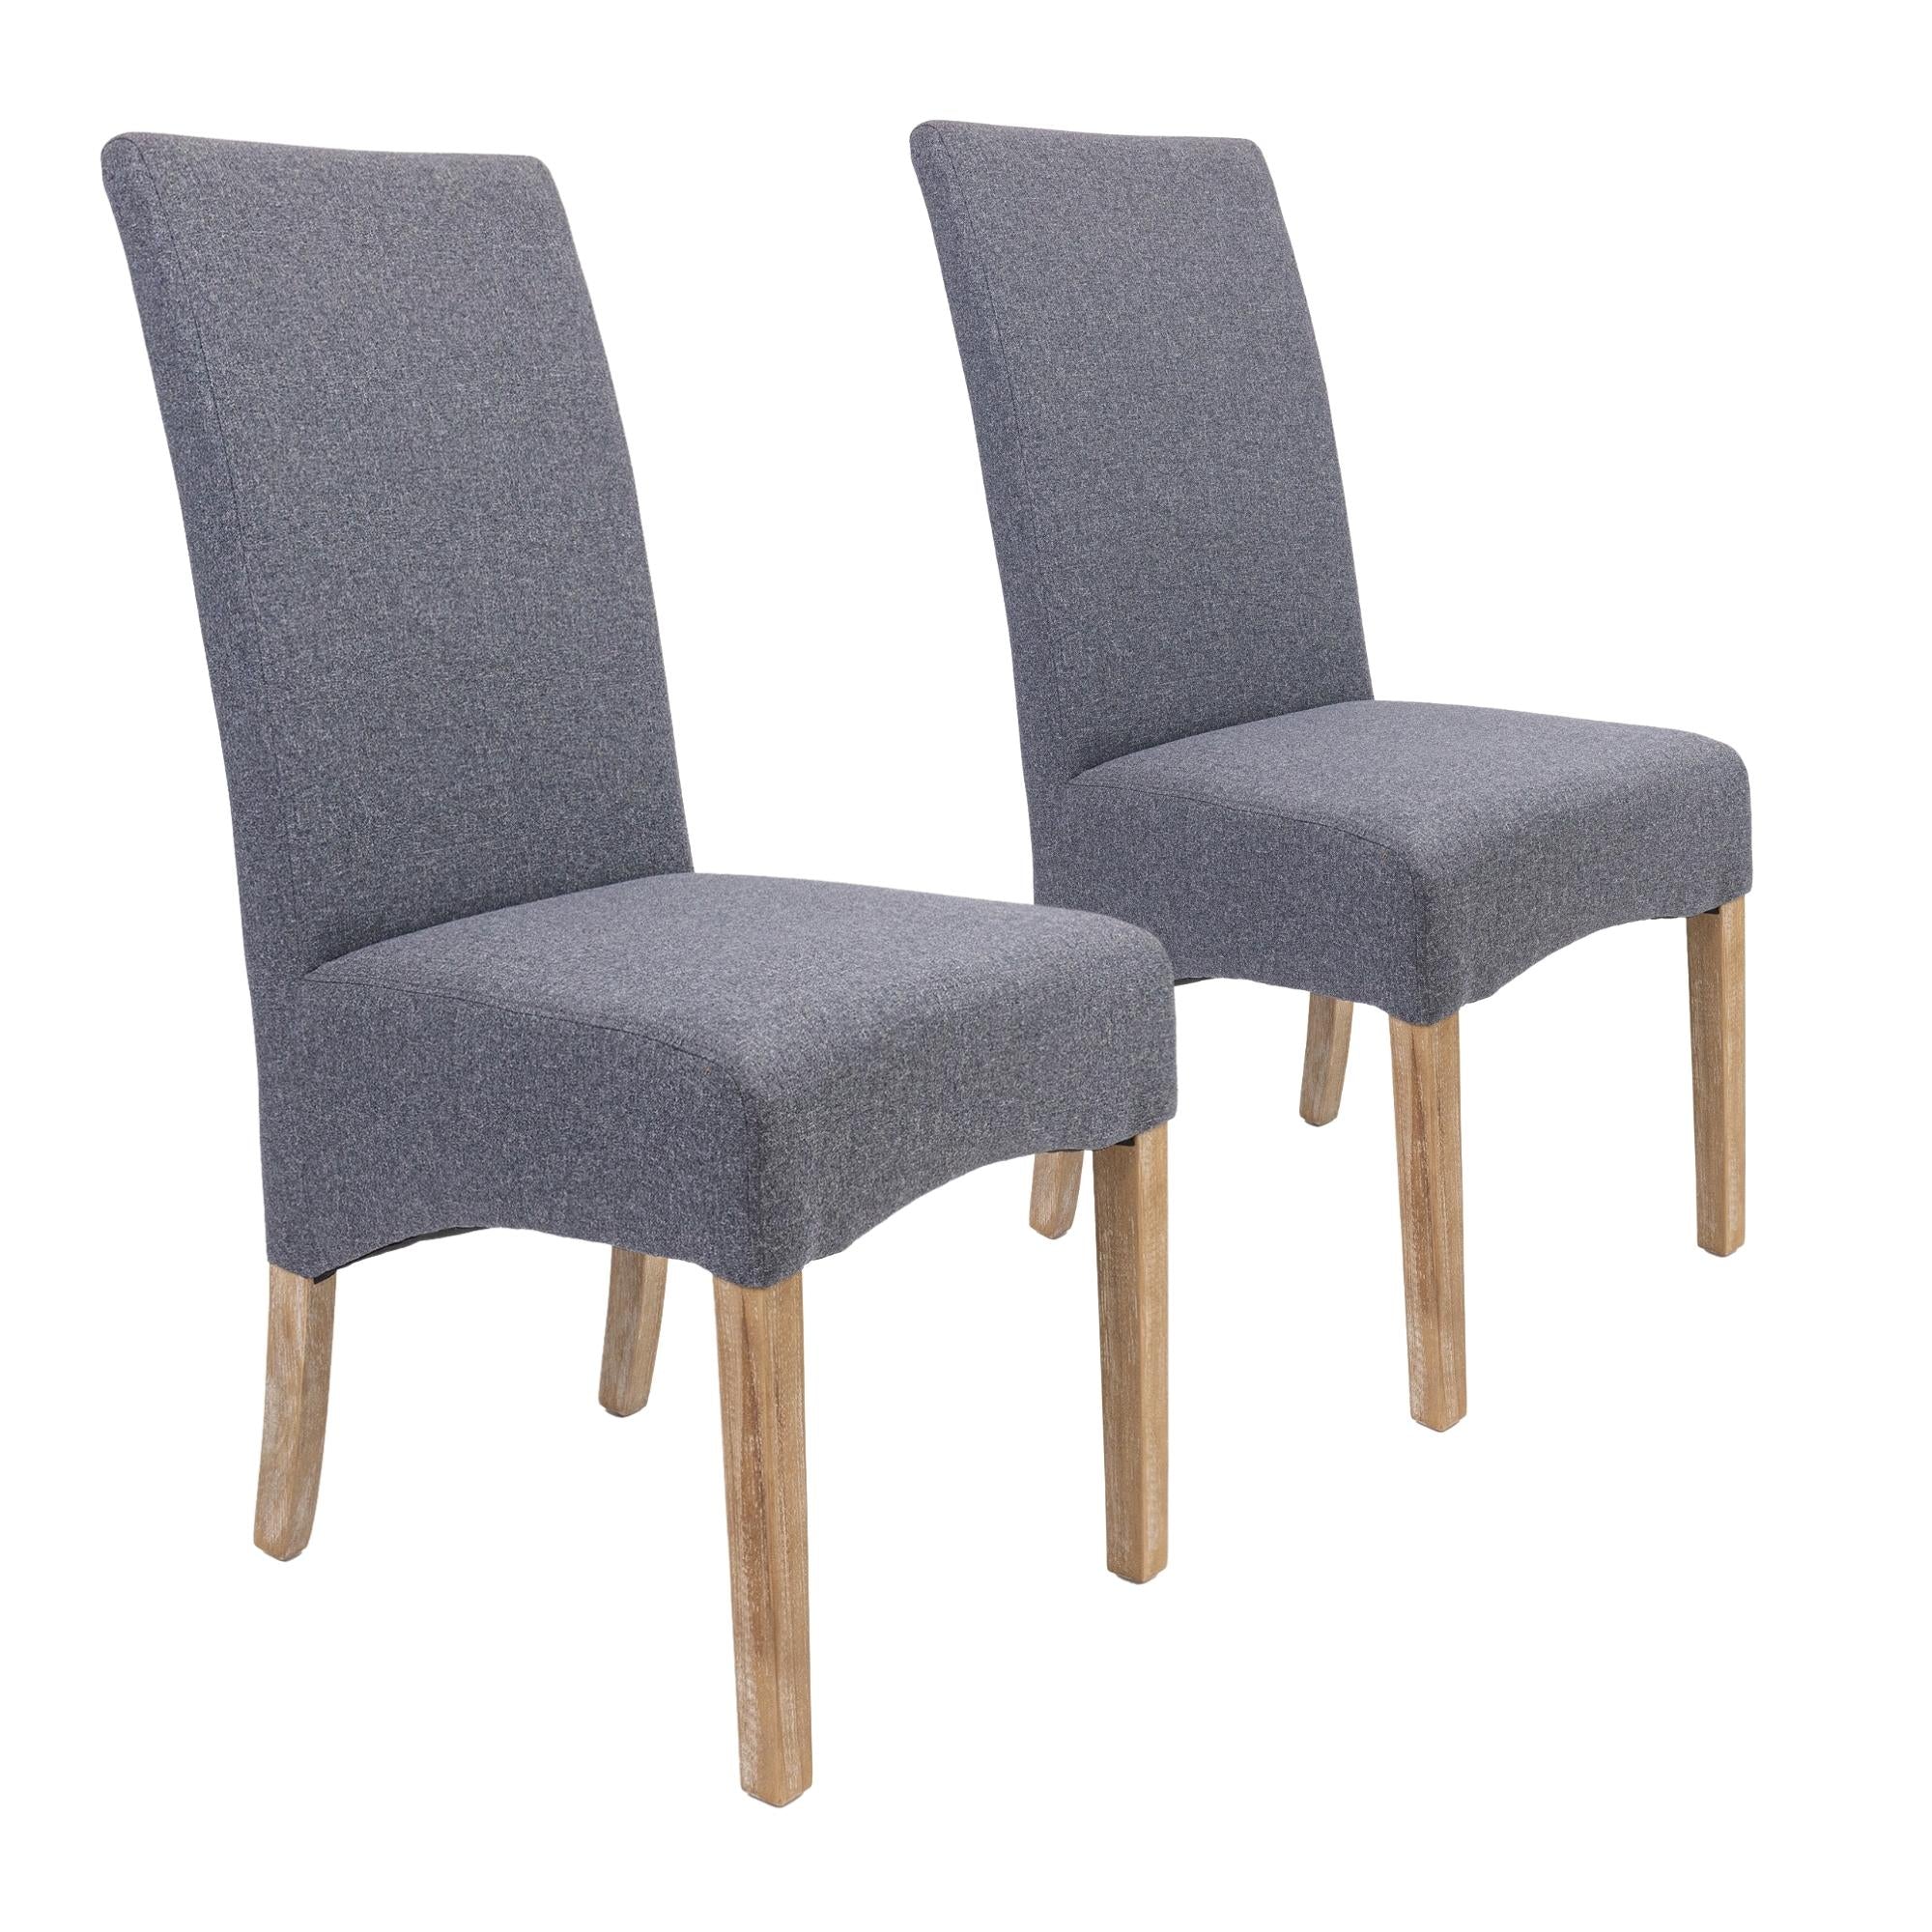 Grey Upholstered Dining Chairs with Pine Frame, Set of 2